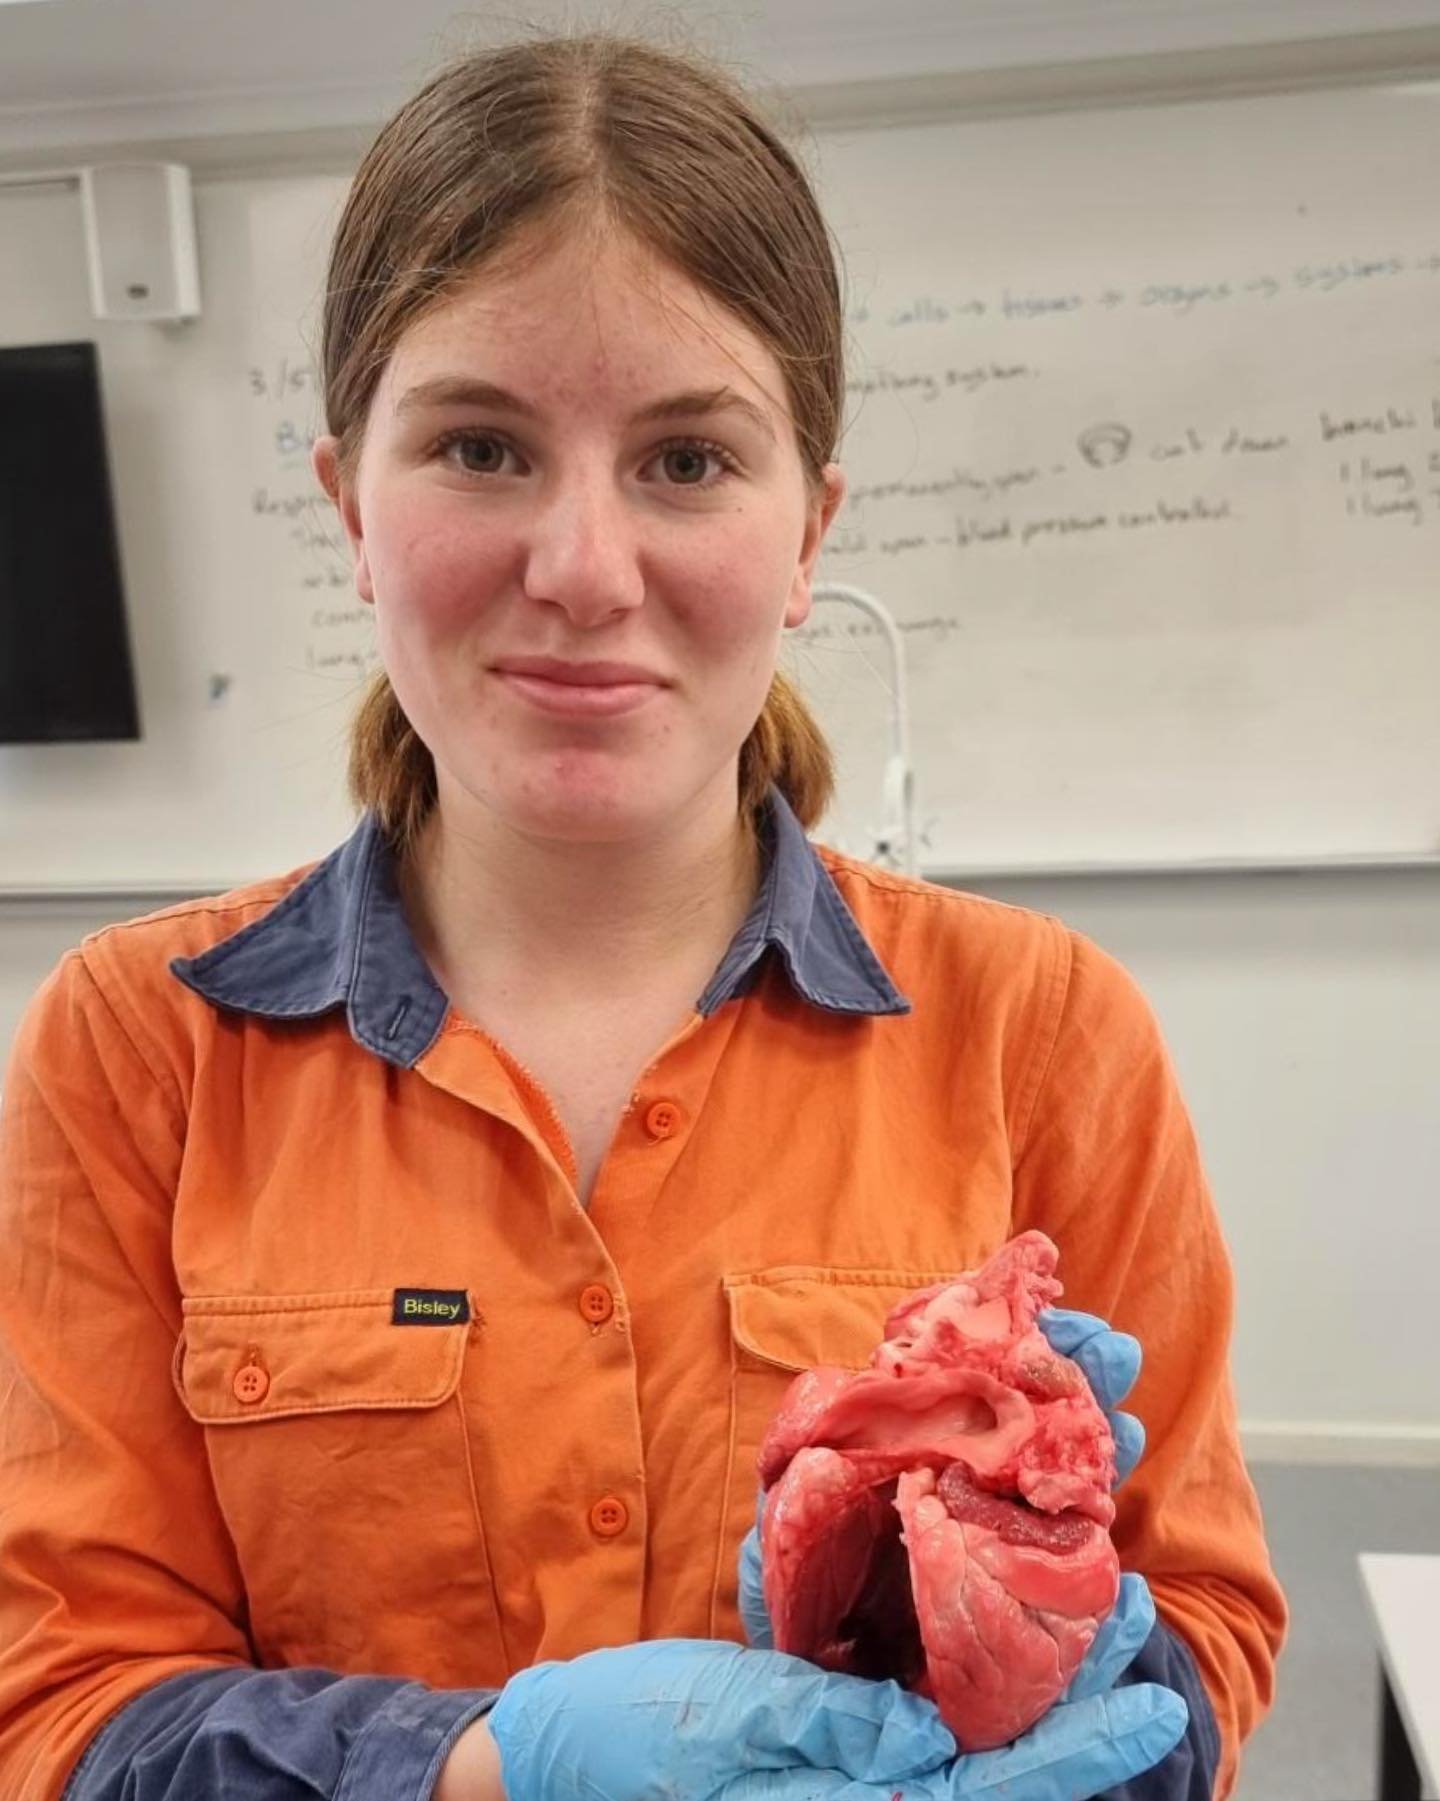 Our Year 11 biology students completed a heart dissection to study the circulatory system in mammals.🫀
.
.
.
.
.
#biology #science #scienceclass #wacoa_denmark #denmarkwa #educationwa #wacollegeofagriculturedenmark #agriculture #studentlife